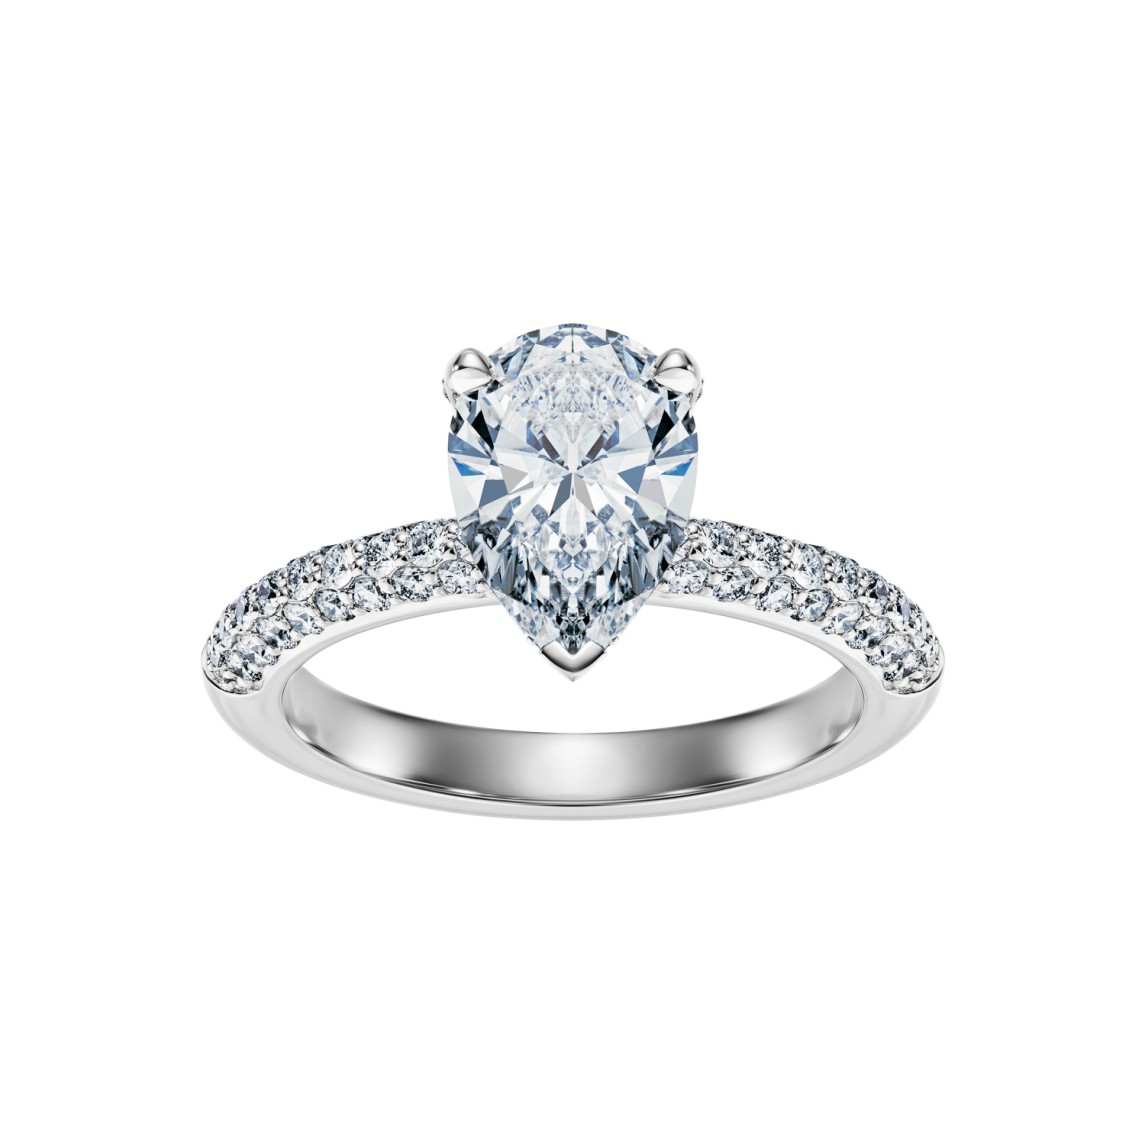 White Gold Ring With Pear-Cut Diamond